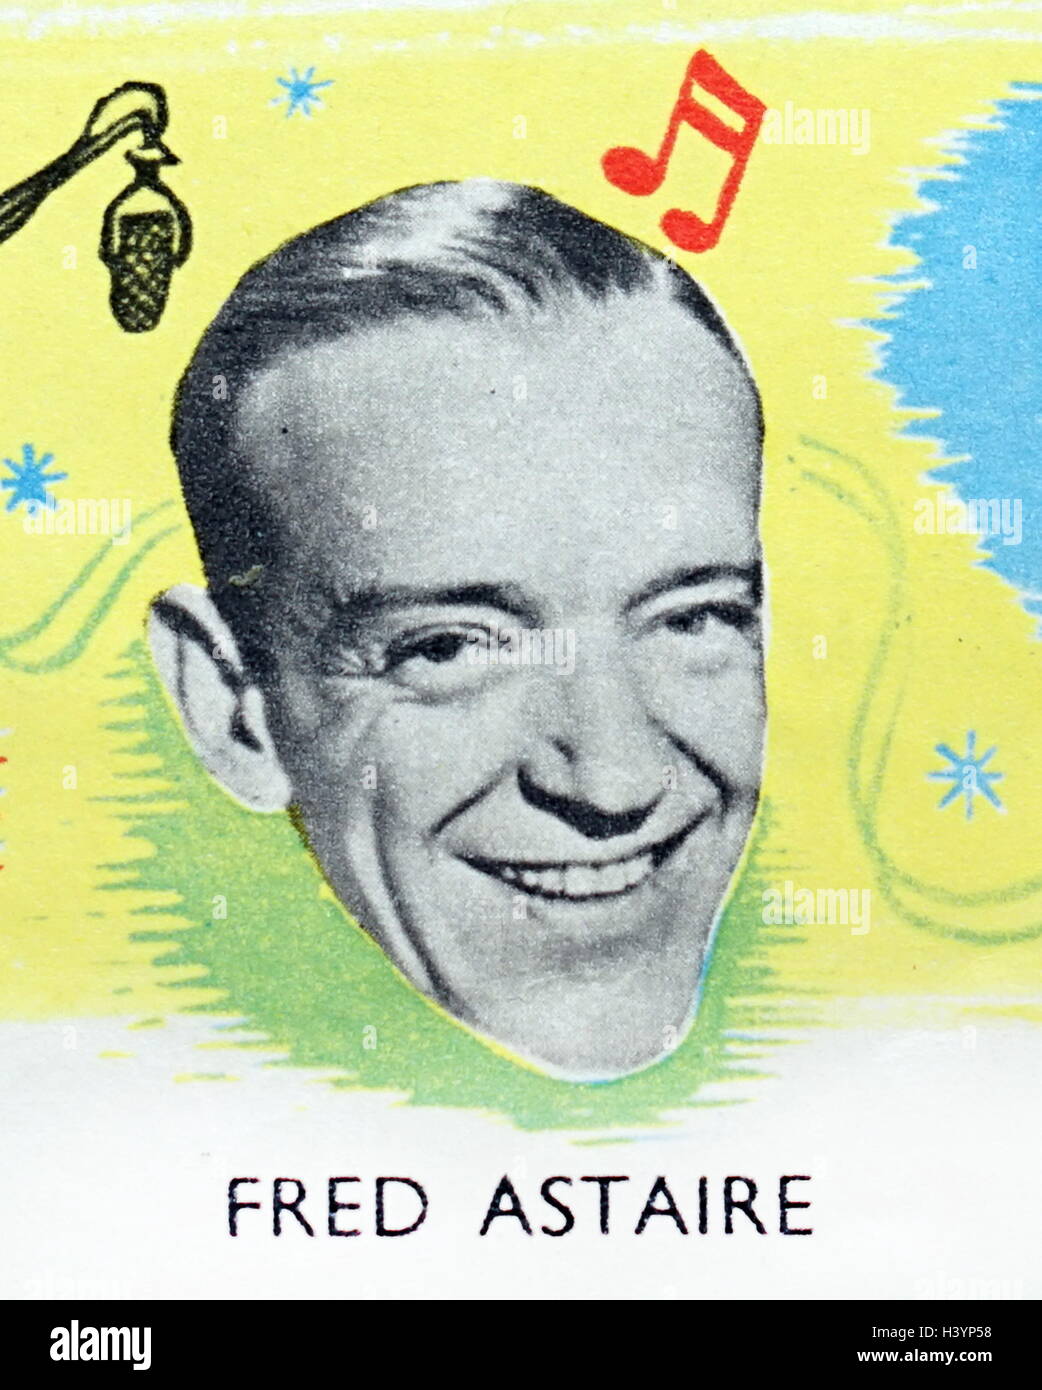 Photograph of Fred Astaire (1899-1987) an American dancer, singer, actor, choreographer, musician and television presenter. Dated 20th Century Stock Photo